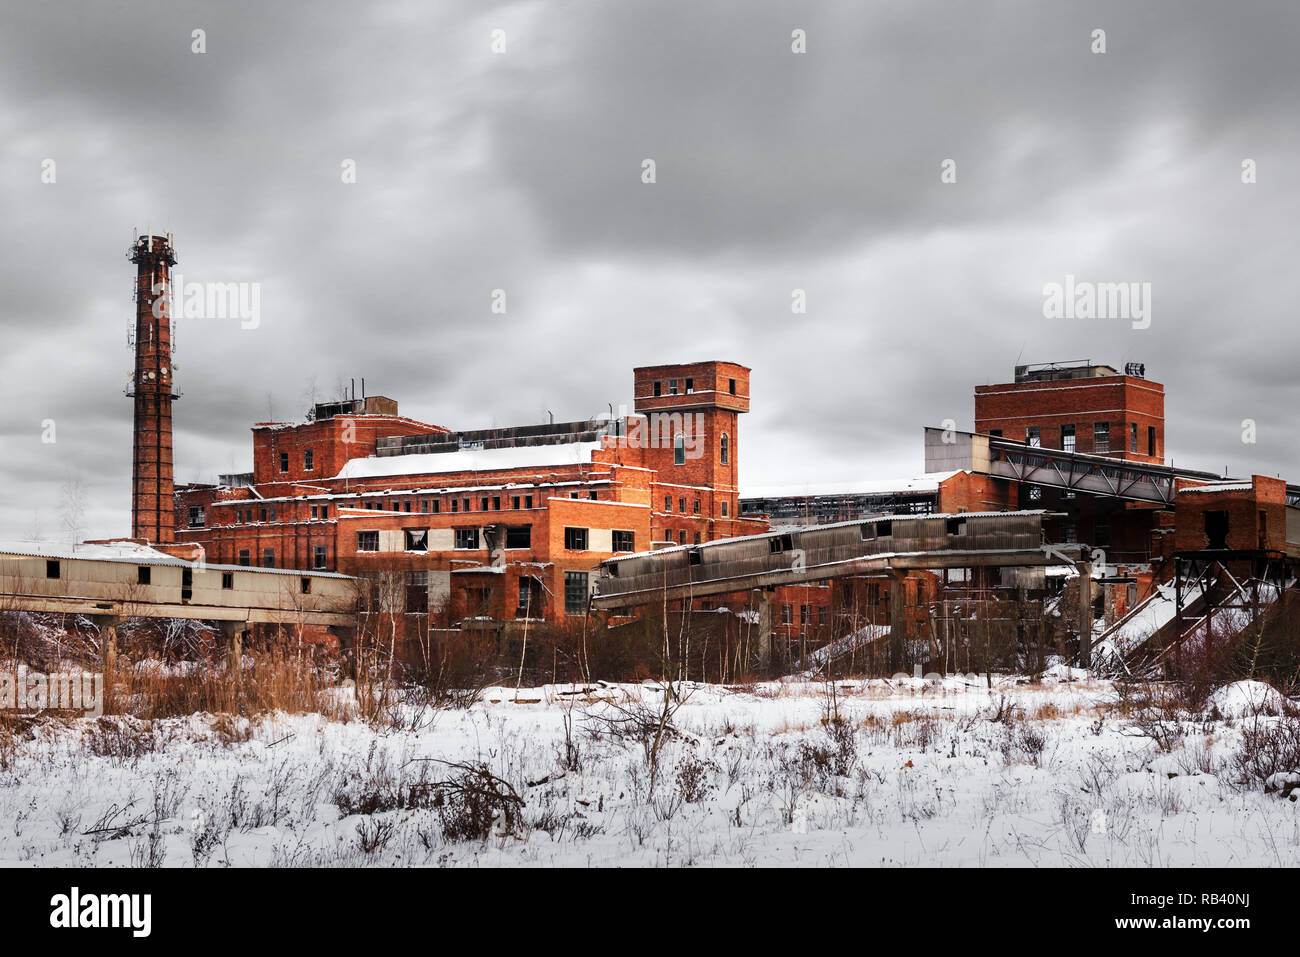 Old ruined factory construction in winter time. Urban exploration photography Stock Photo